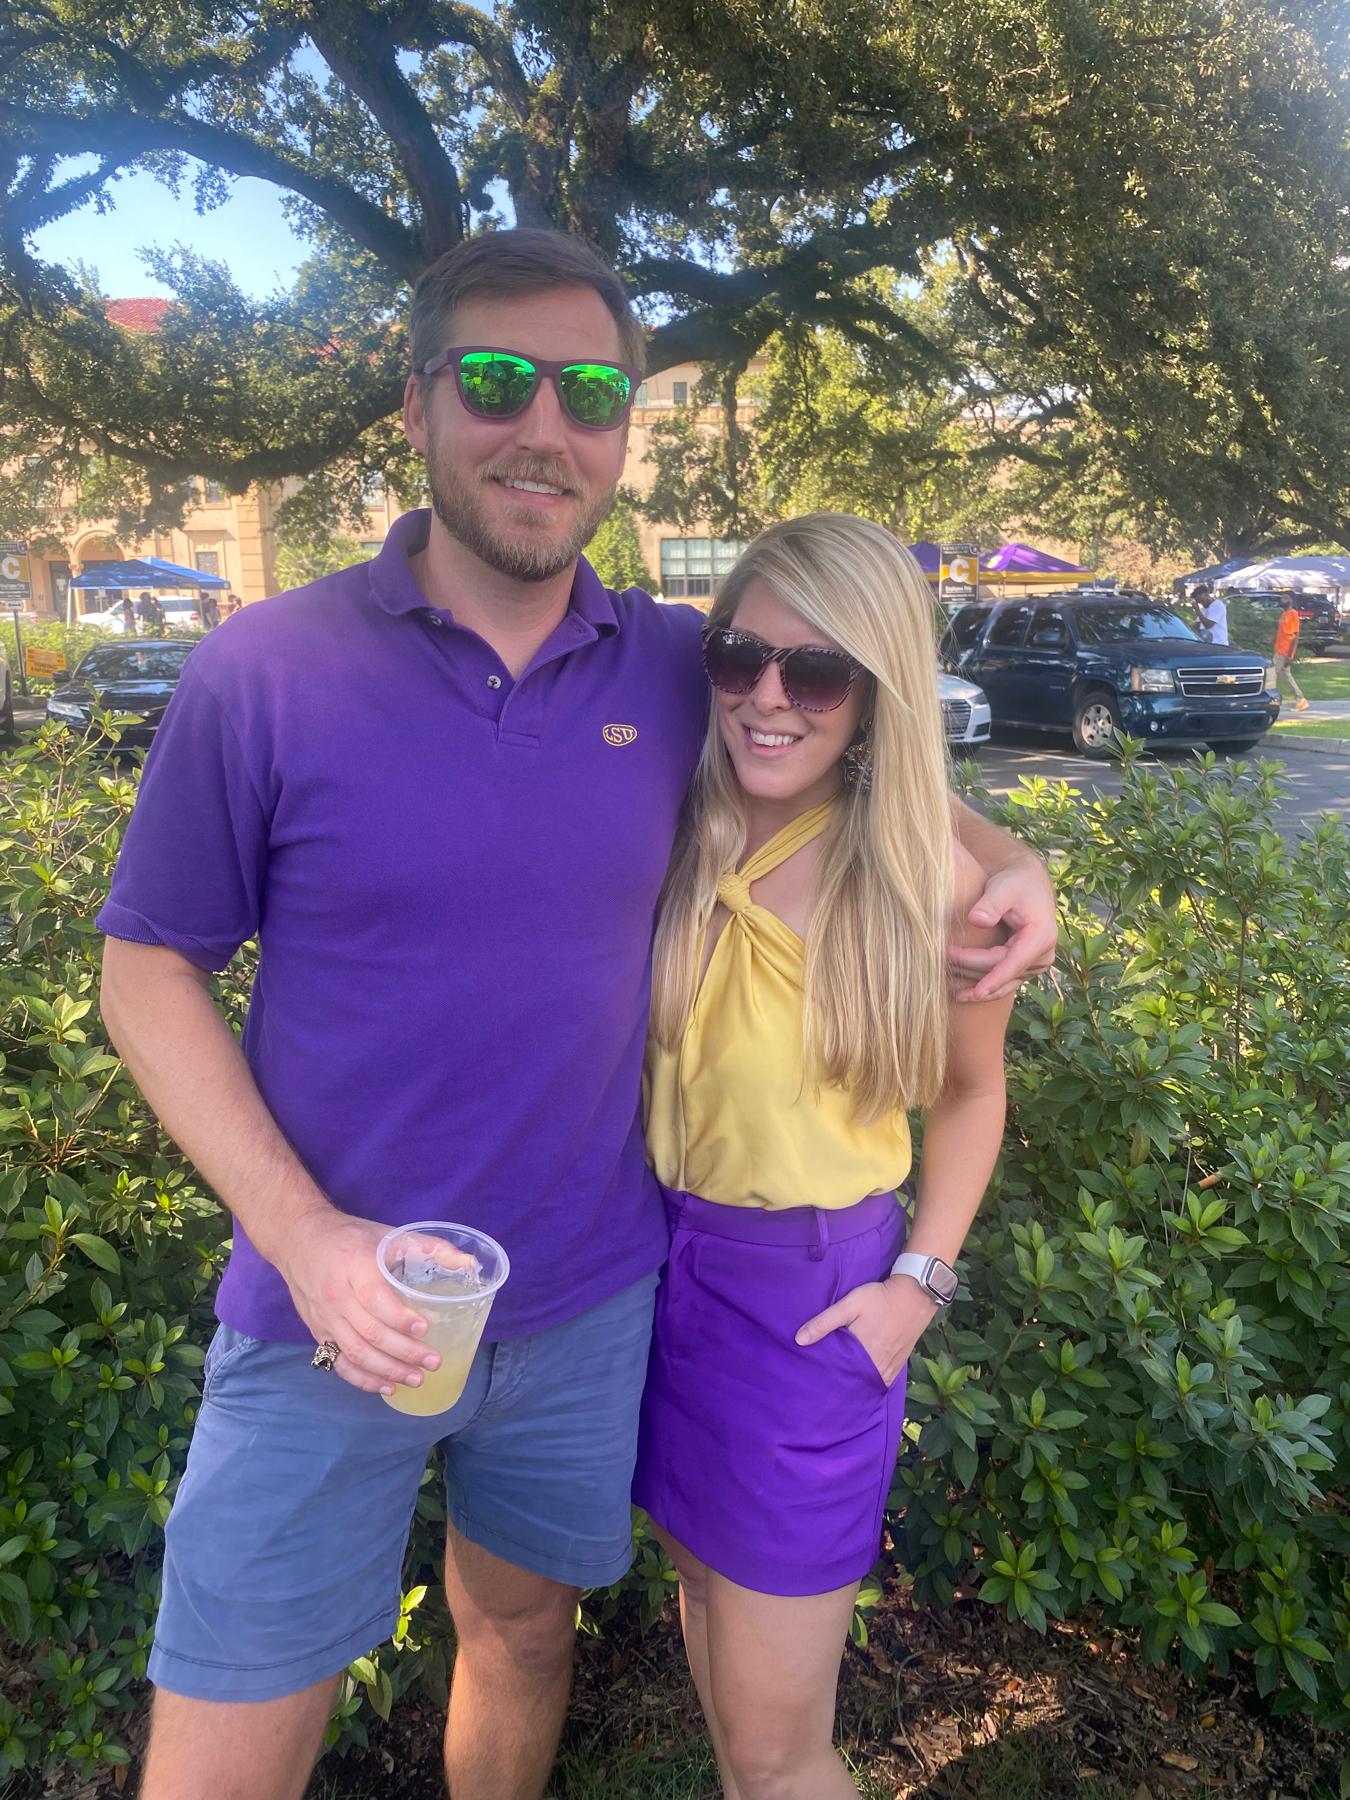 Arielle's first ever LSU game